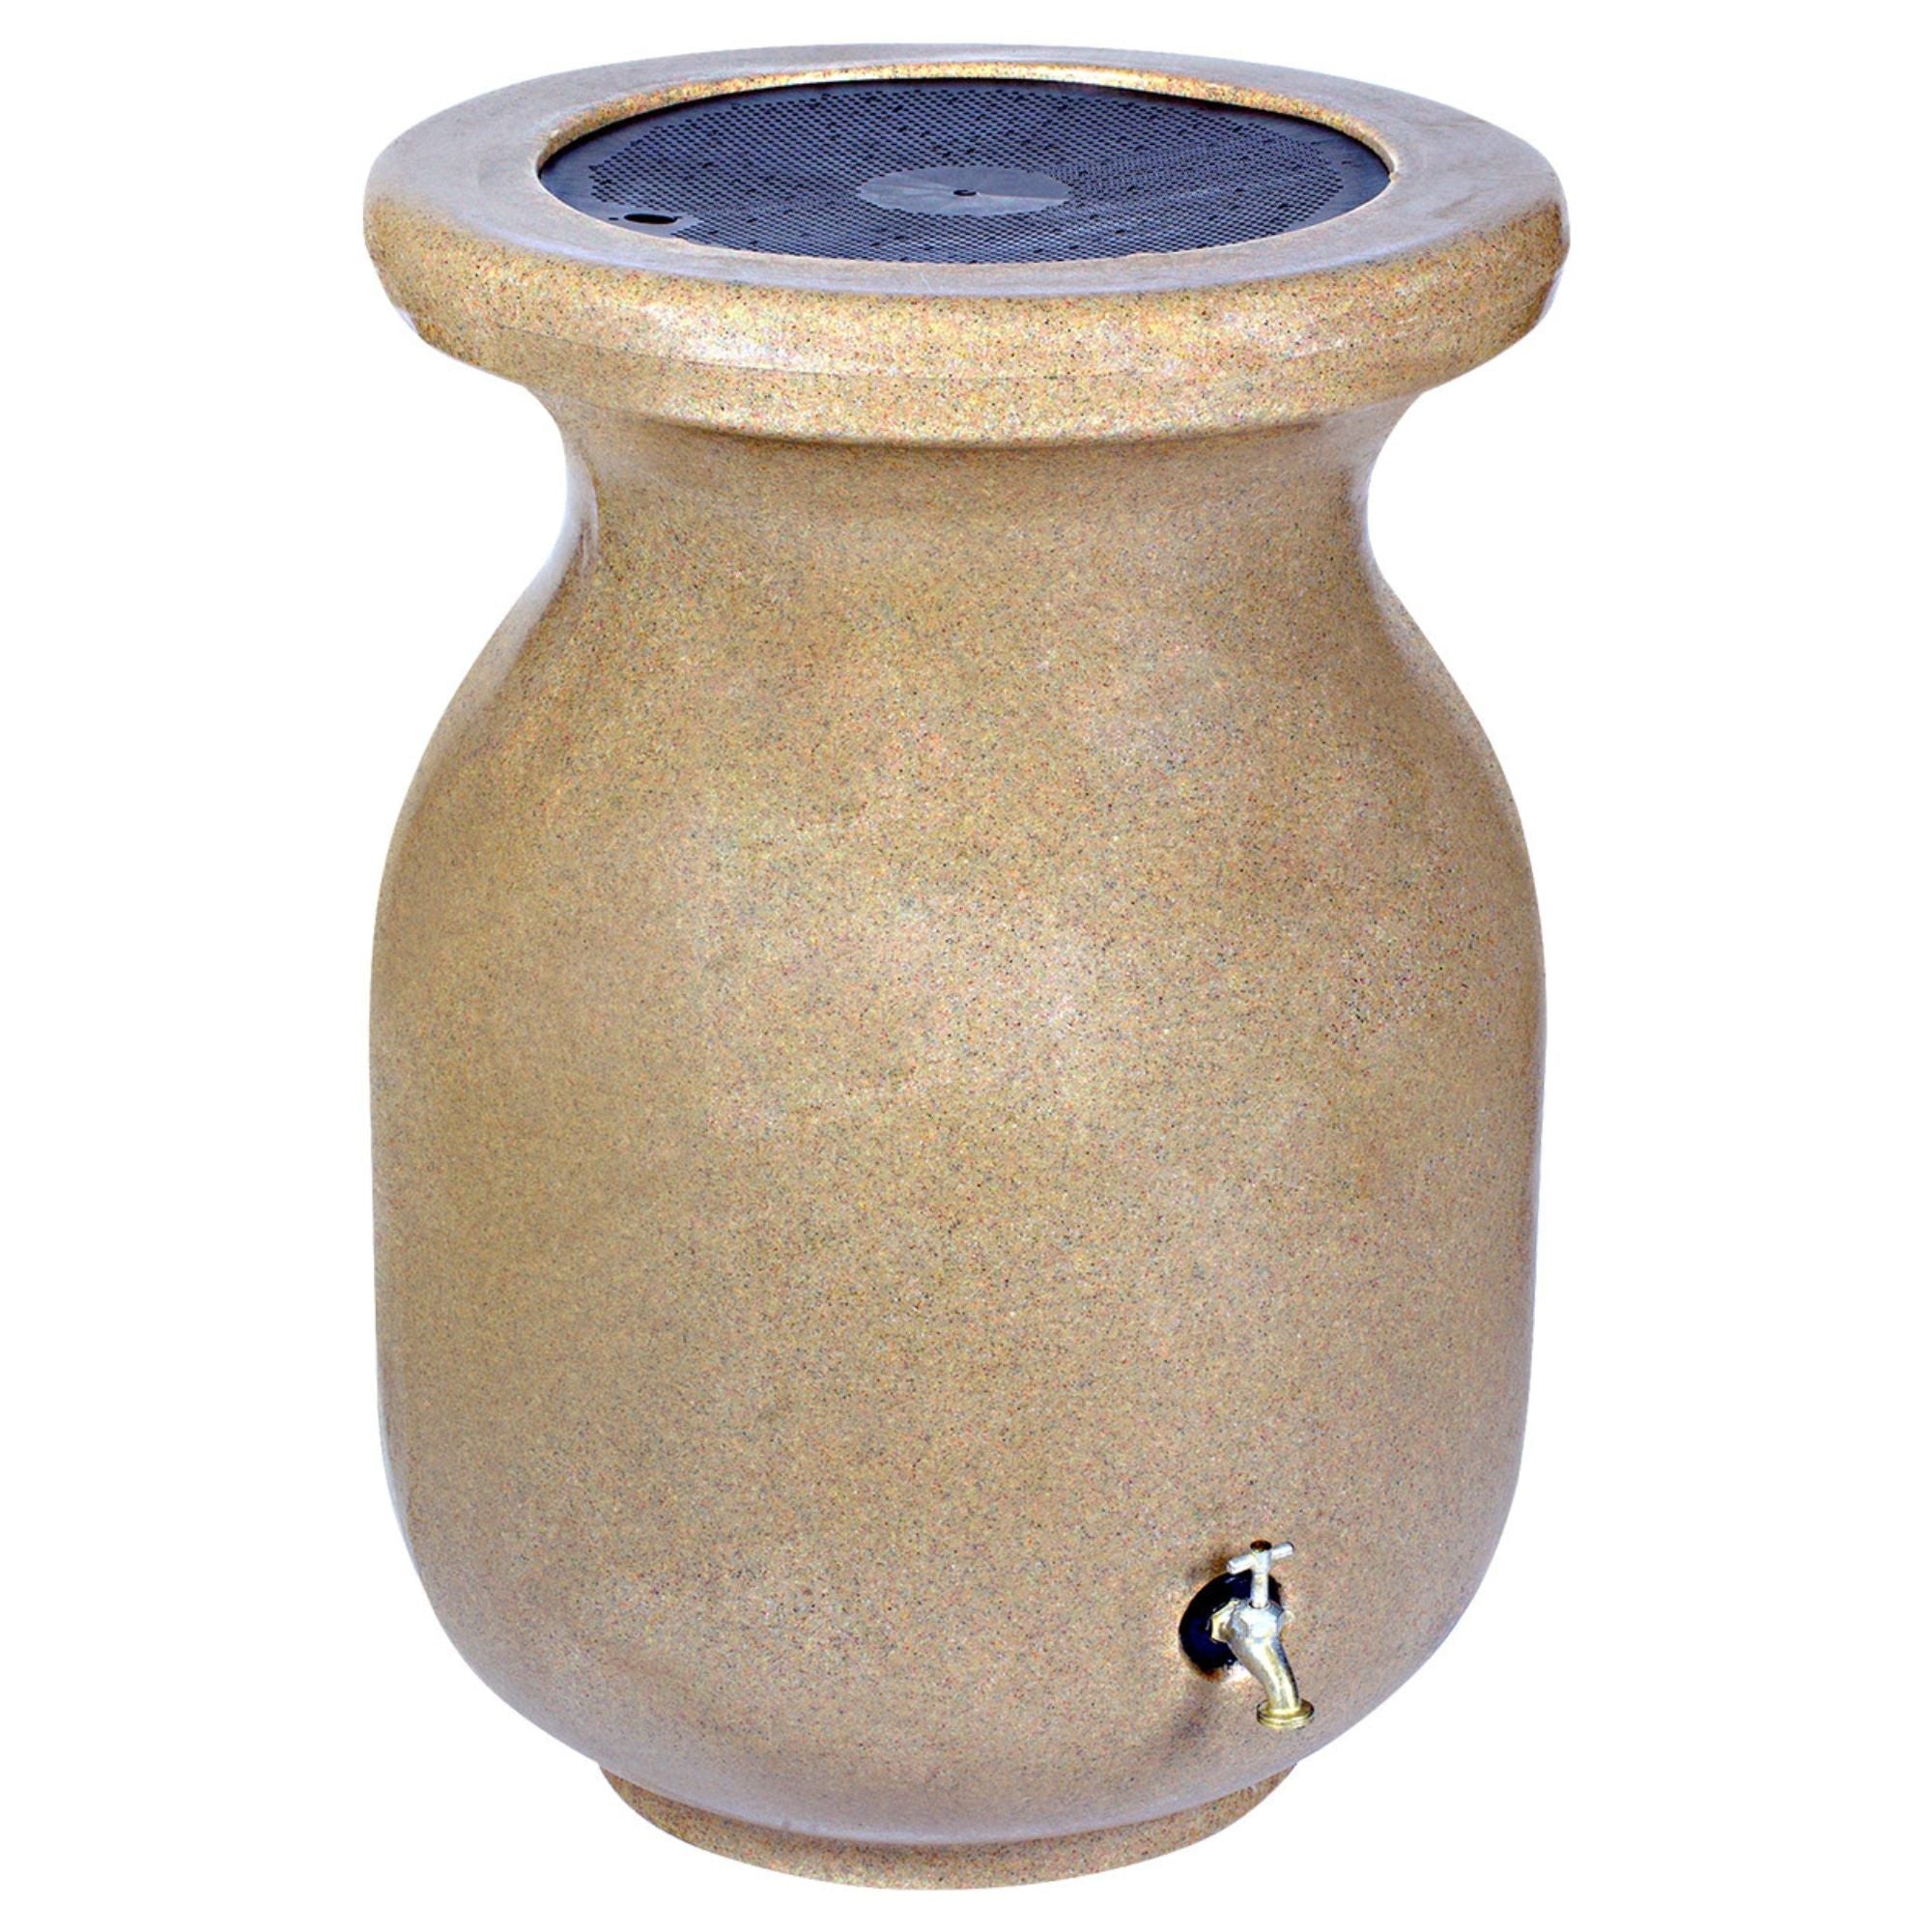 Product shot of stone-look beige rain barrel on a white background